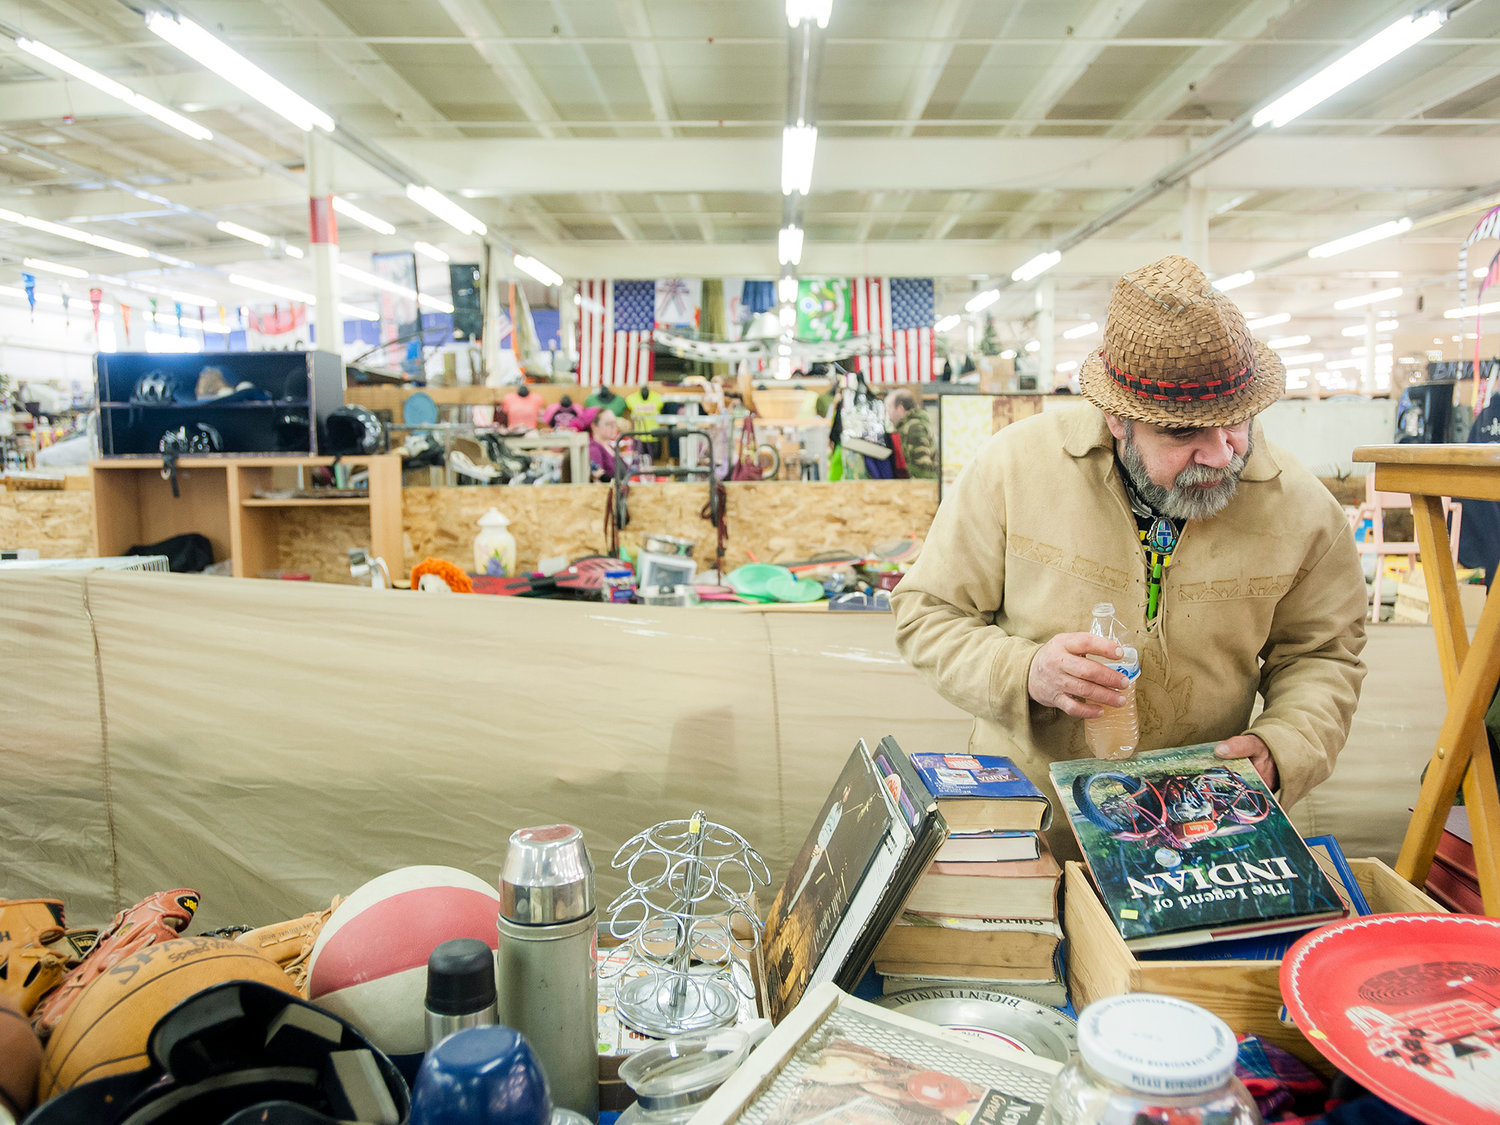 Chief Alexander sorts through books at Jerry Roper's shop at Yard Birds Mall in Chehalis on Tuesday, Feb. 25.